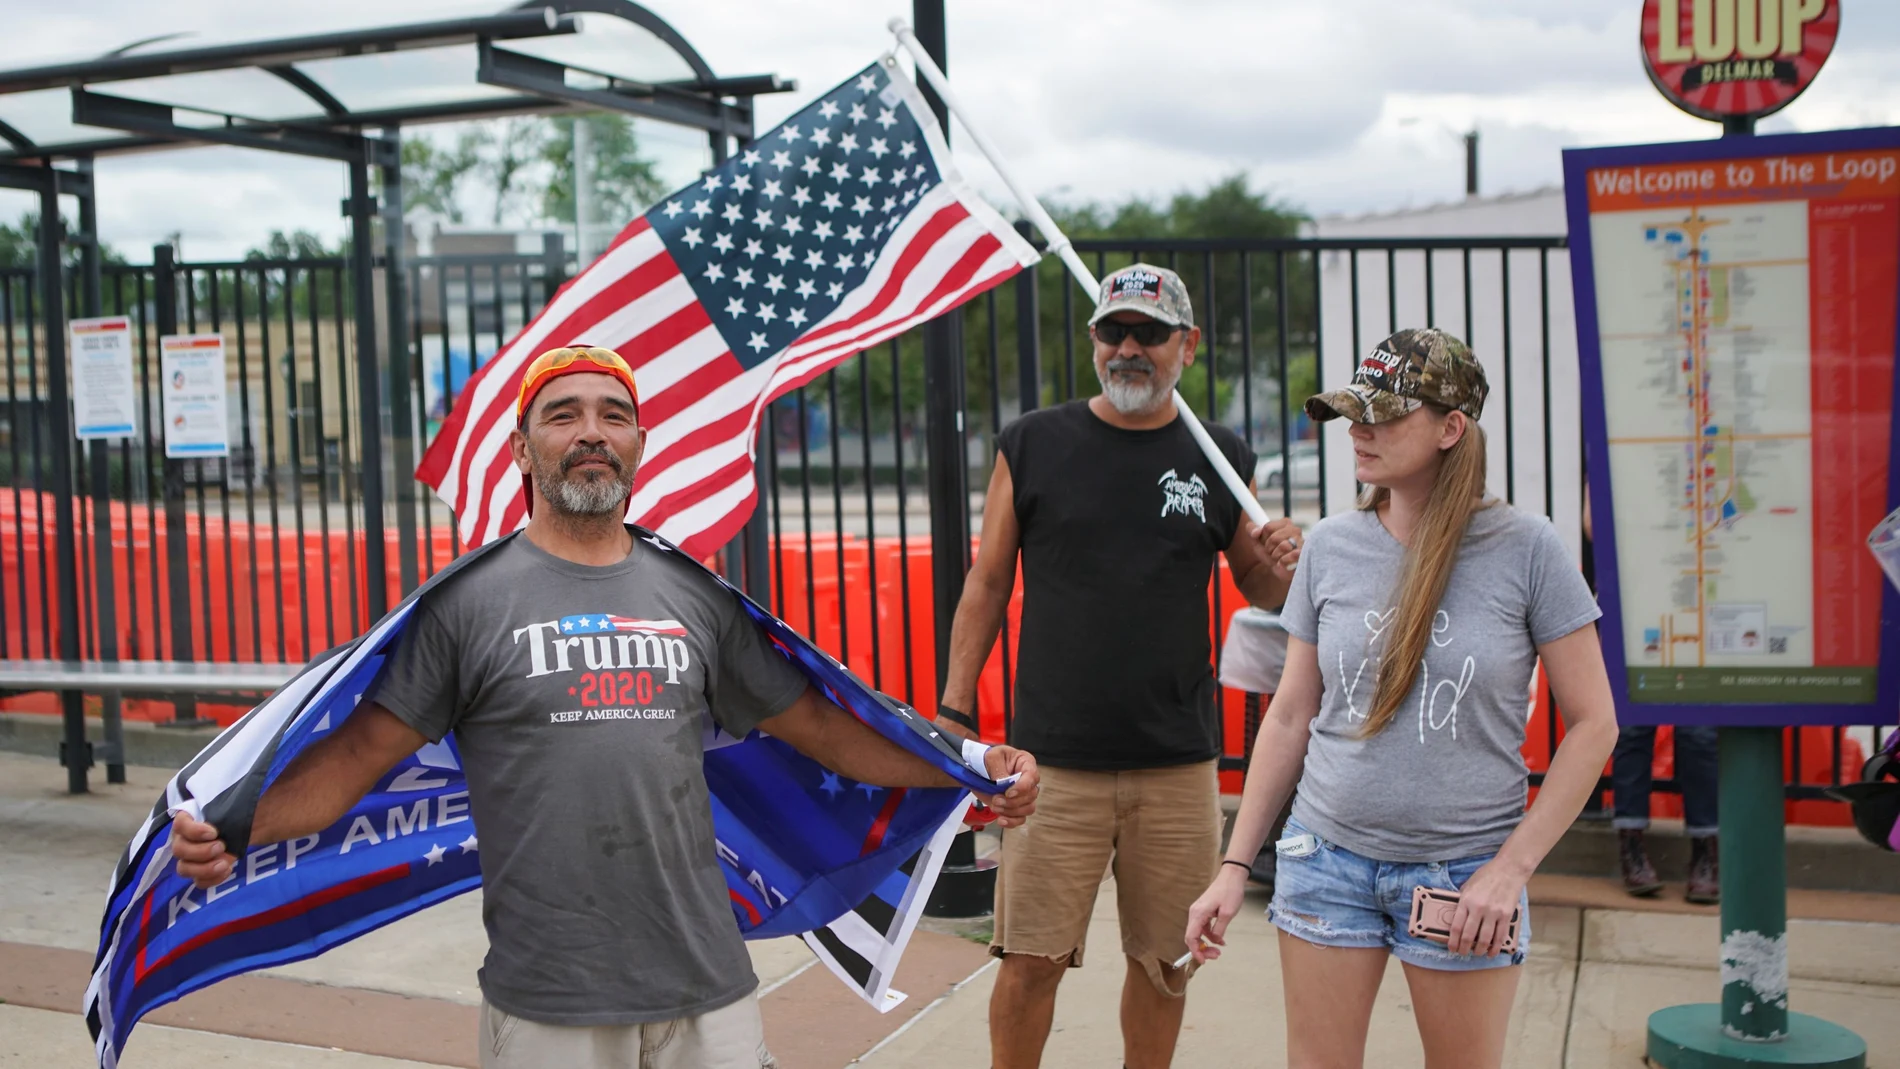 Trump supporters meet in the Delmar Loop during a protest in St. Louis